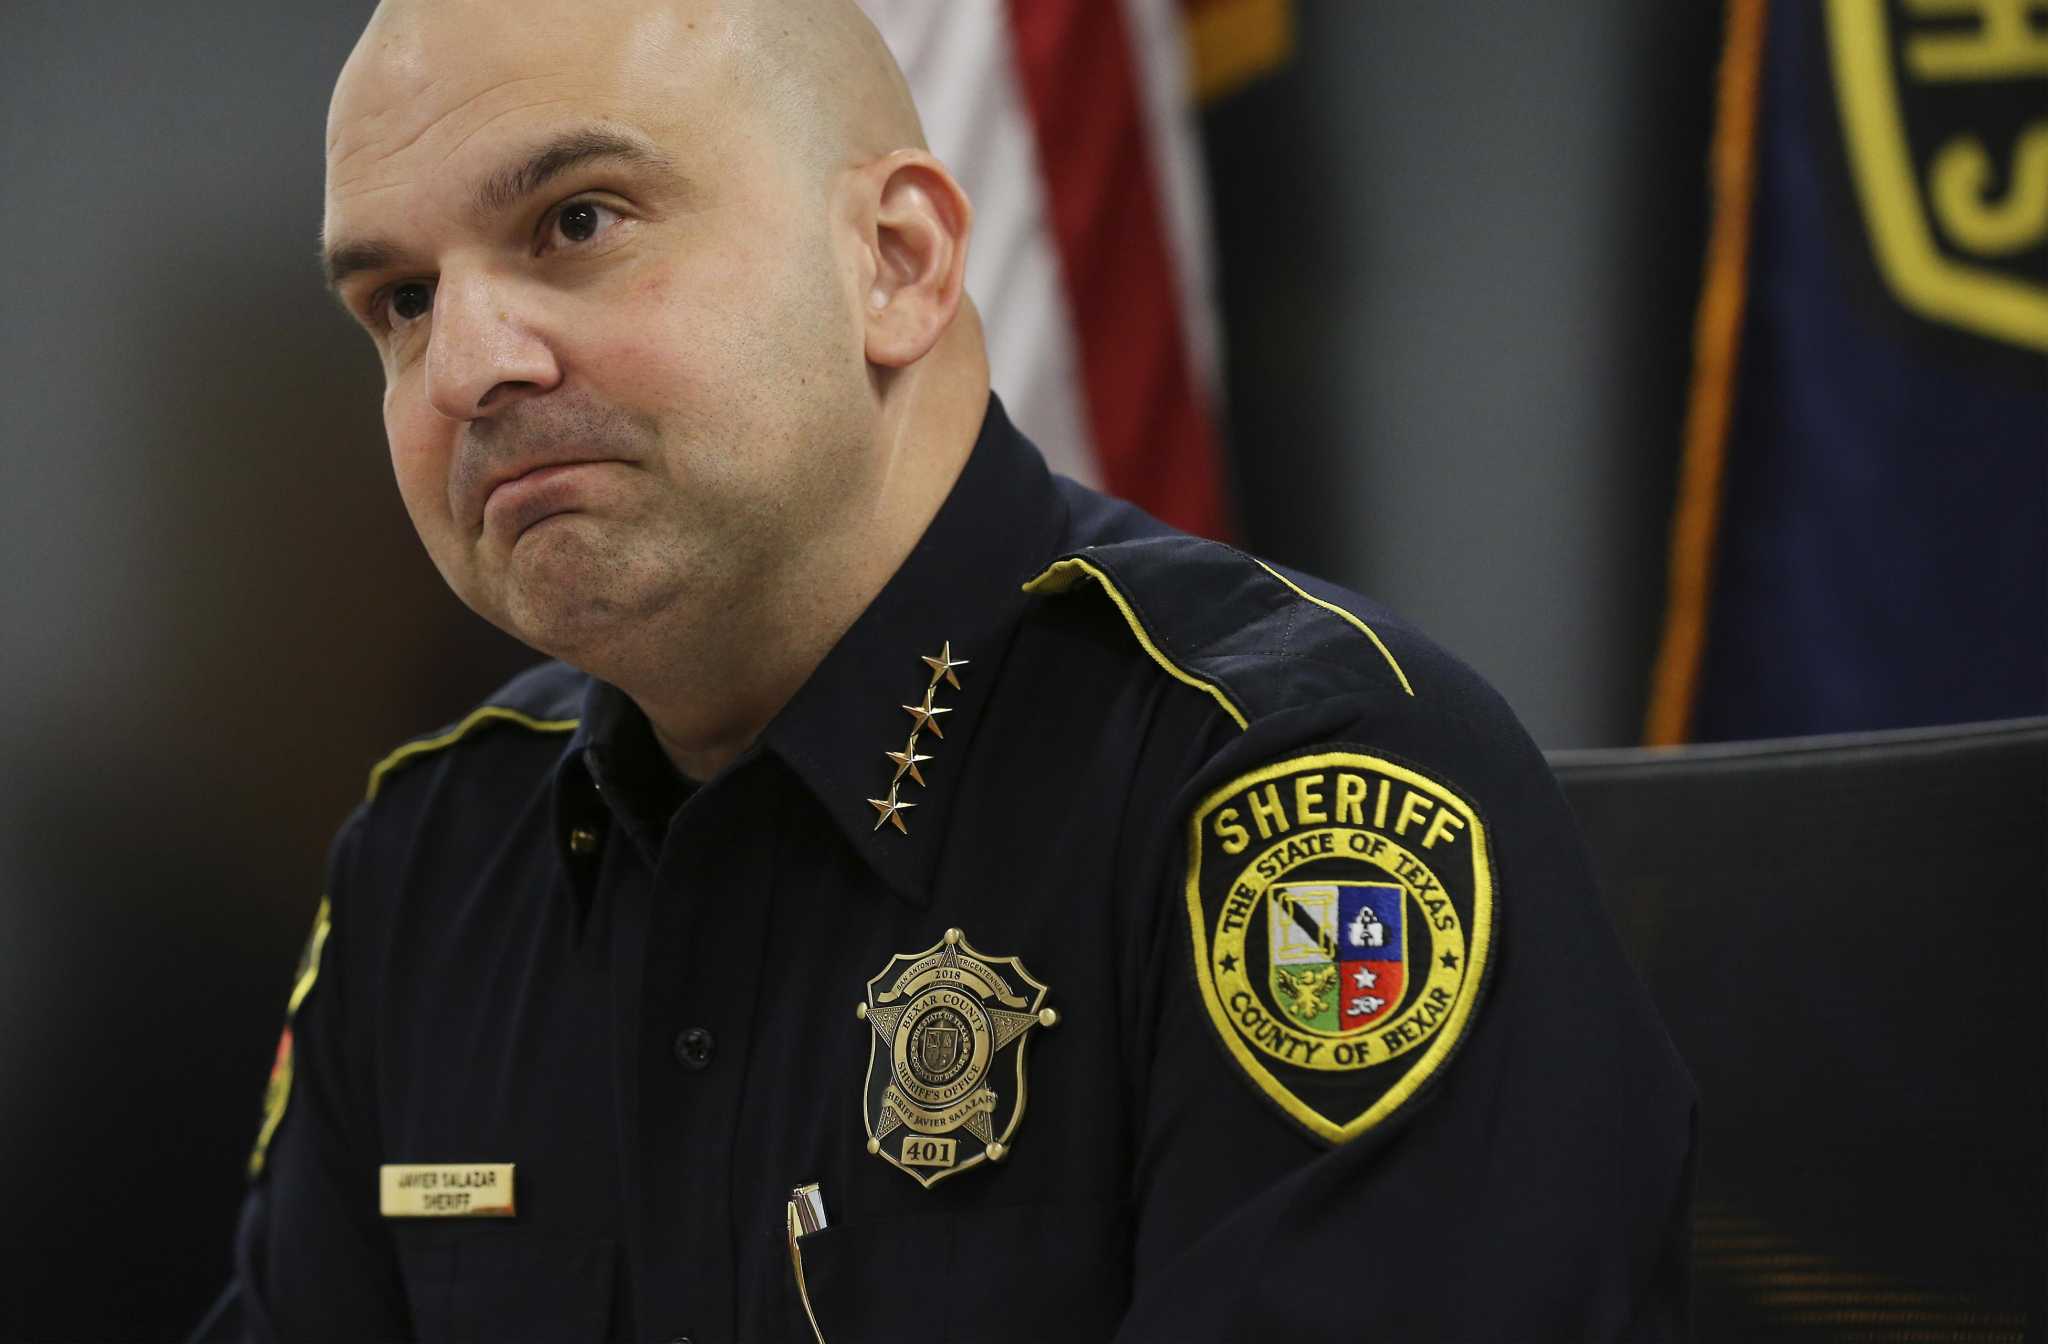 San Antonio's sheriff delves deeper into dealing with